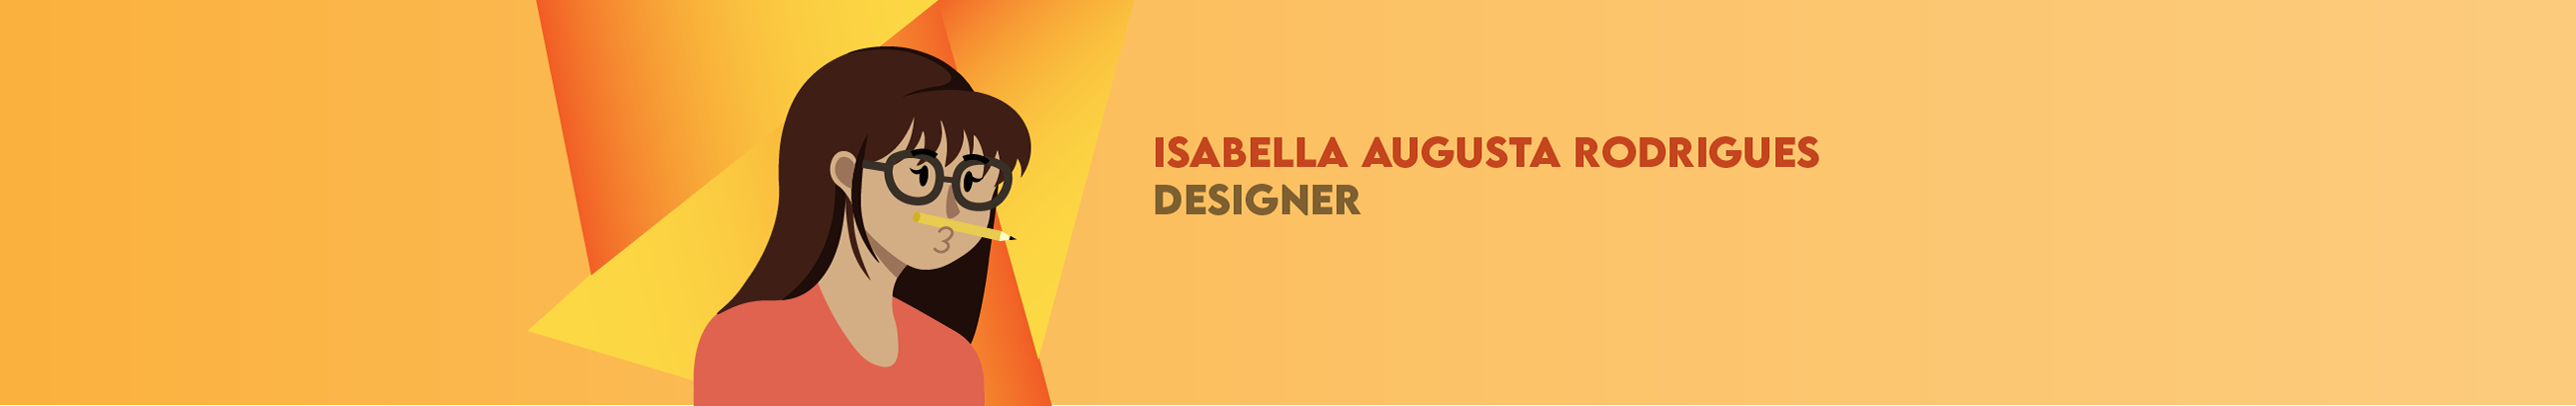 Isabella Augusta Rodrigues's profile banner